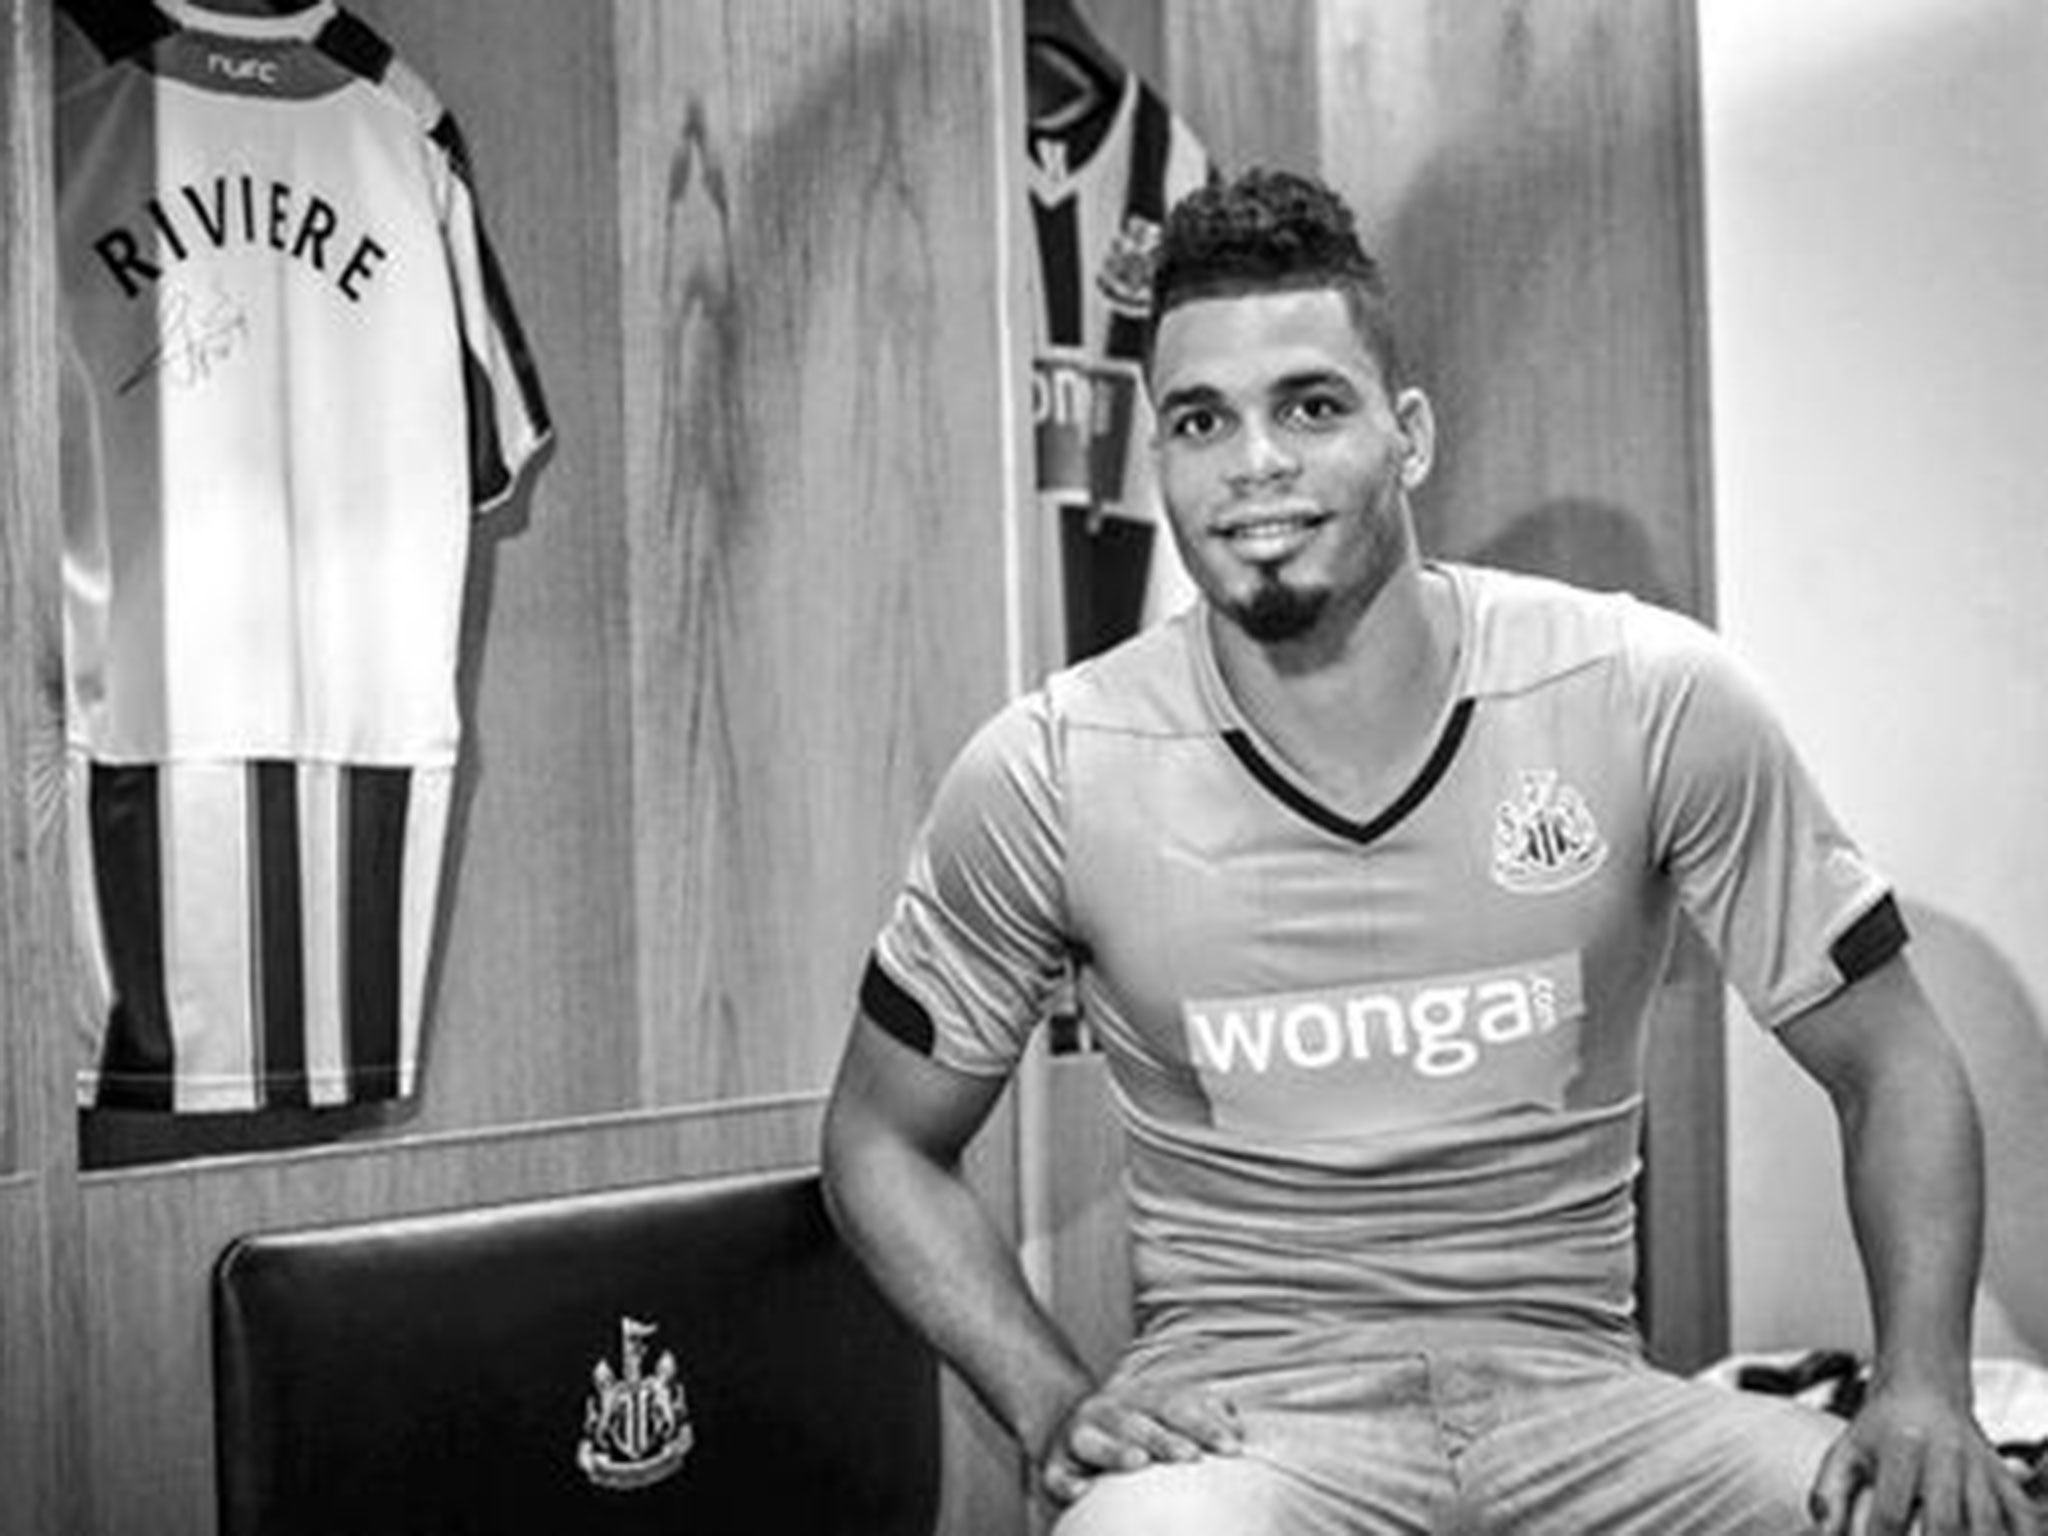 Newcastle unveiled Emmanuel Riviere via their Twitter account